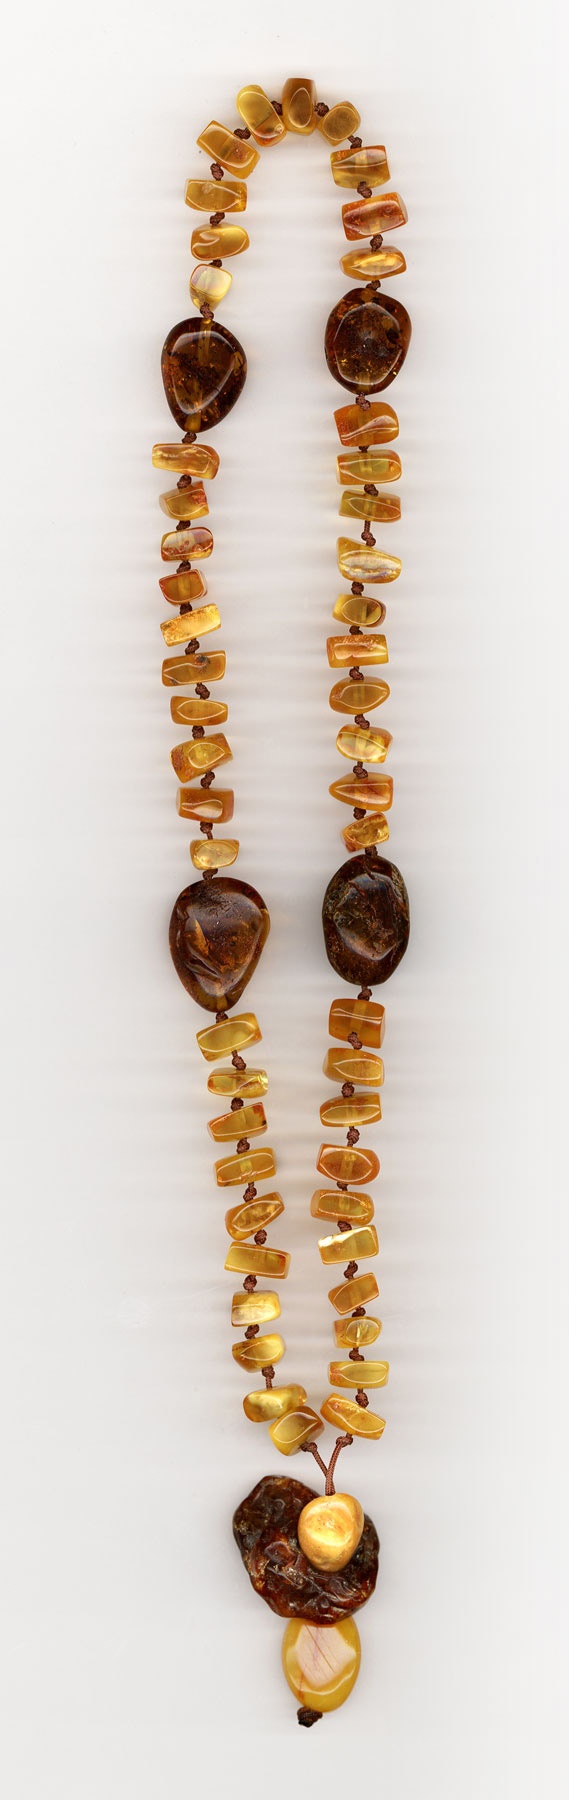 Catholic prayer object-Rosary-made of genuine amber from Baltic sea-cut by hand.